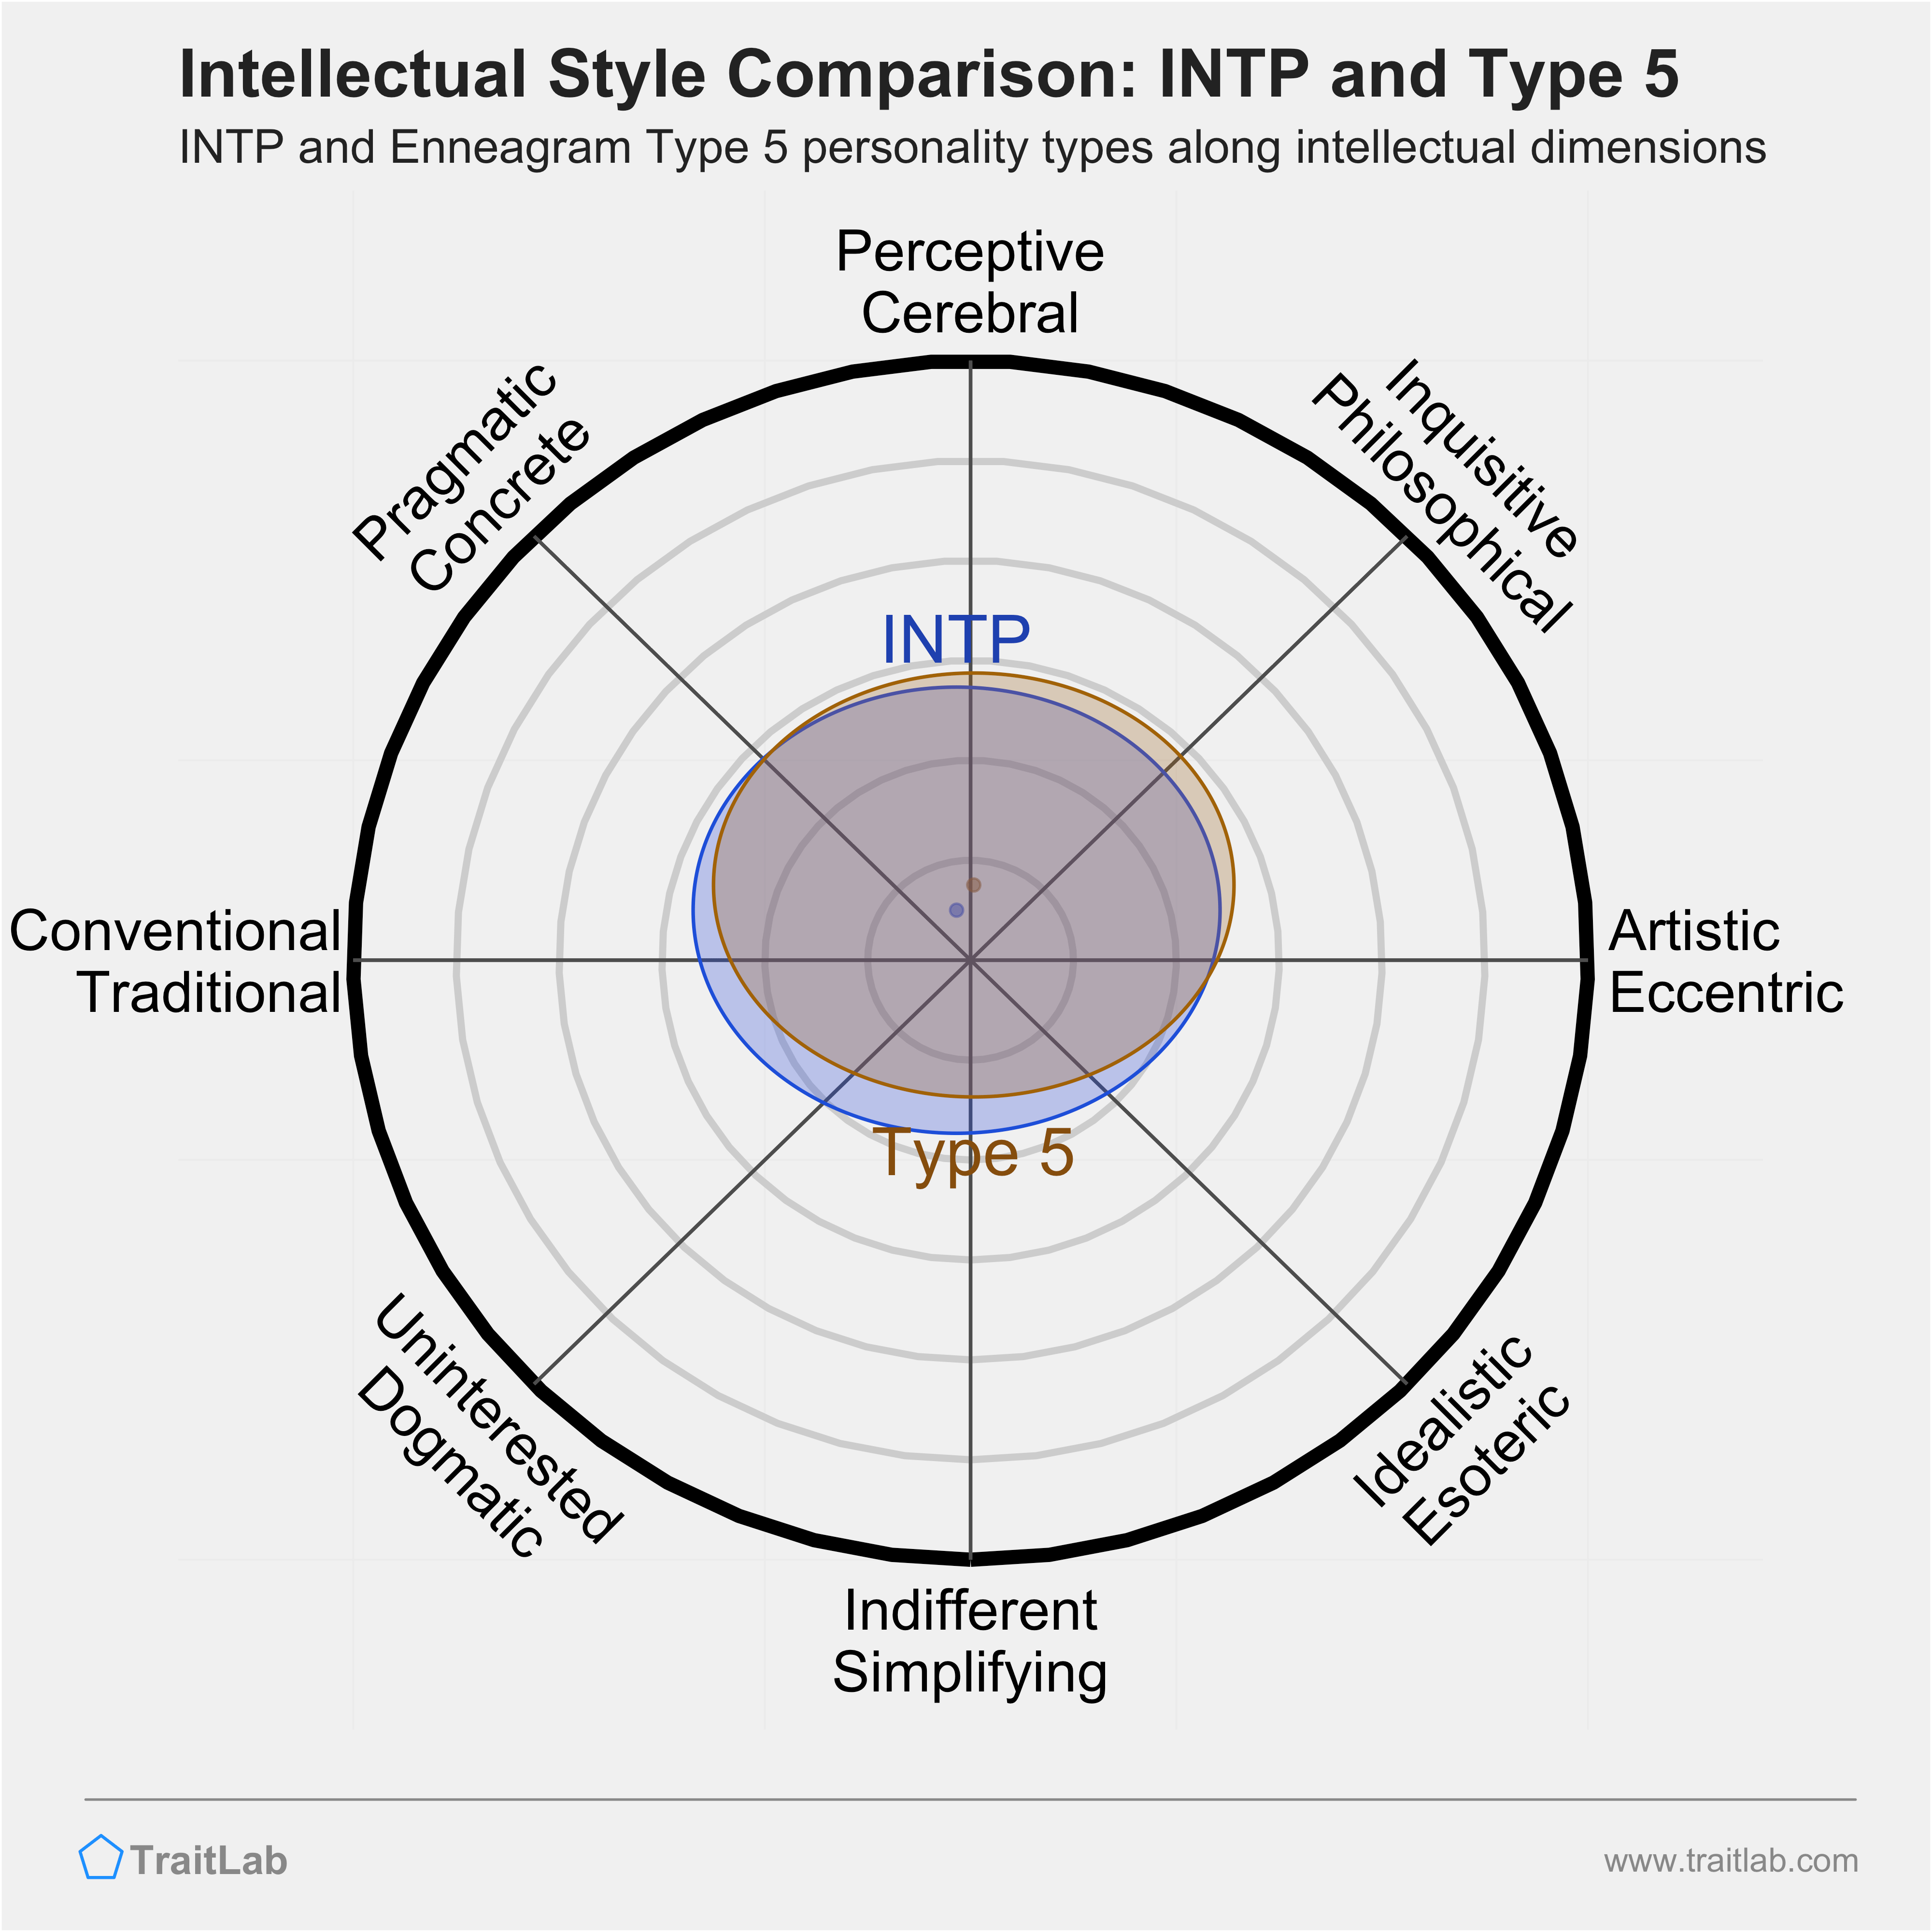 INTP and Type 5 comparison across intellectual dimensions